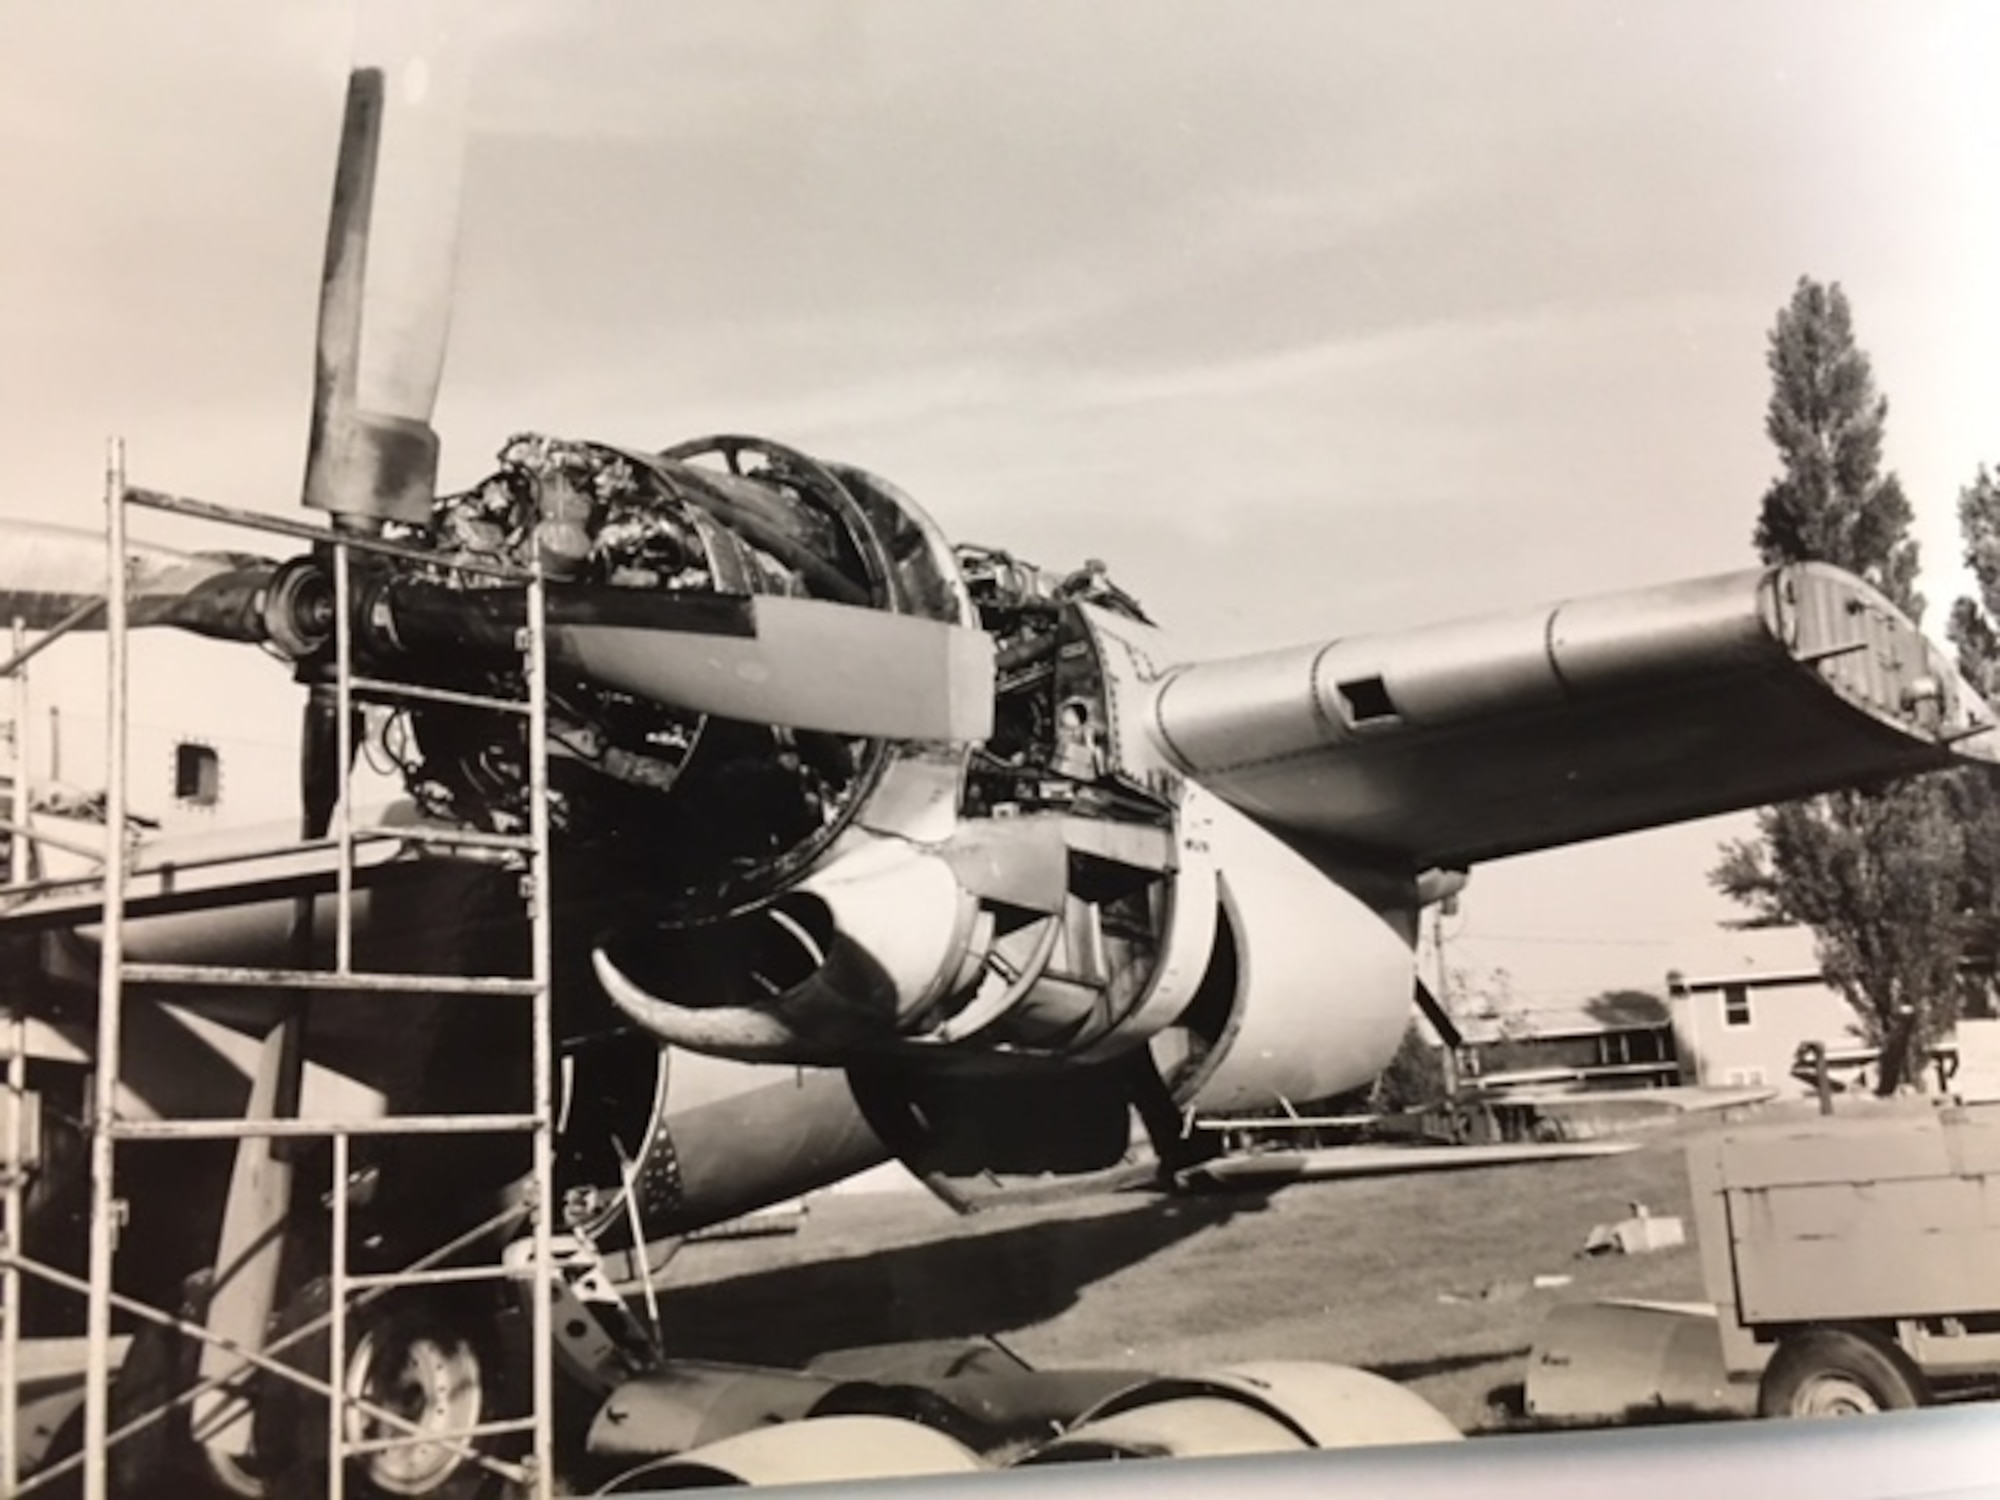 One of the engines of a B-29 Superfortress sits partially disassembled in the wing of the aircraft.